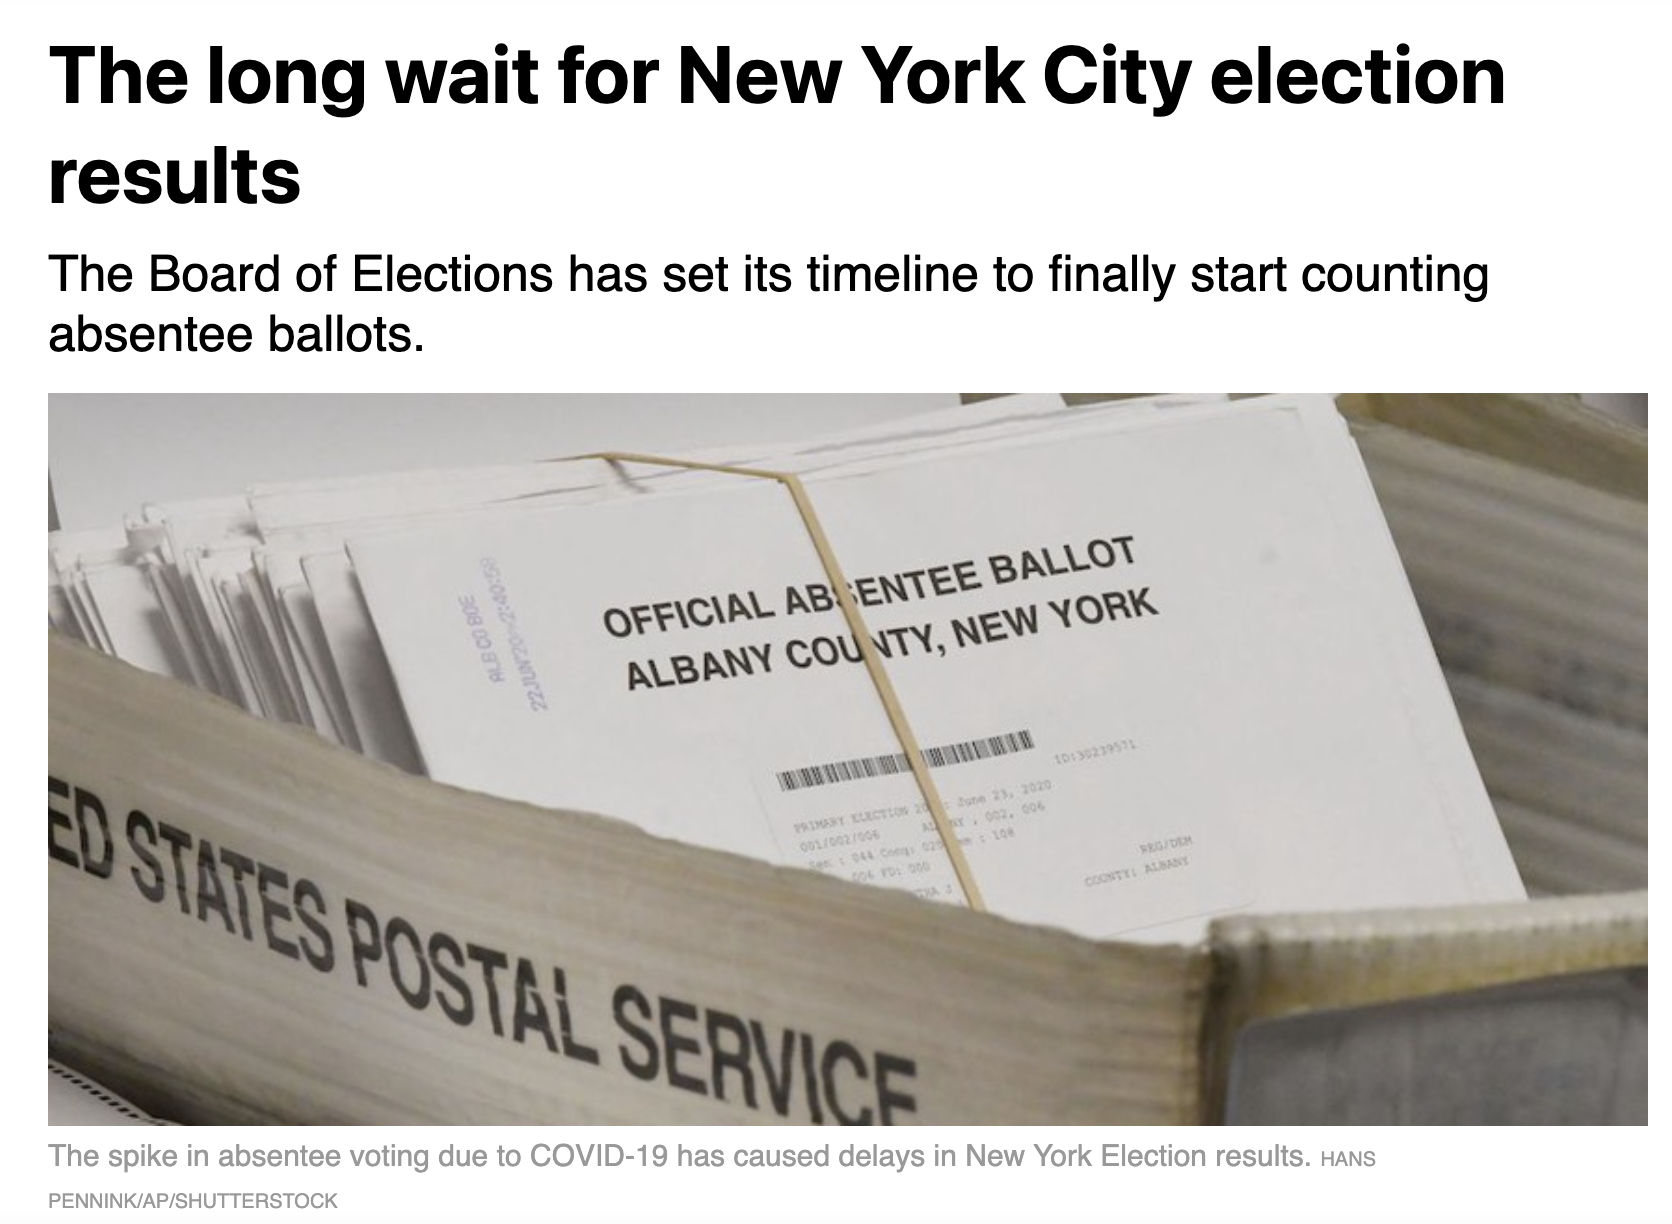 https://www.cityandstateny.com/politics/2020/06/the-long-wait-for-new-york-city-election-results/175839/